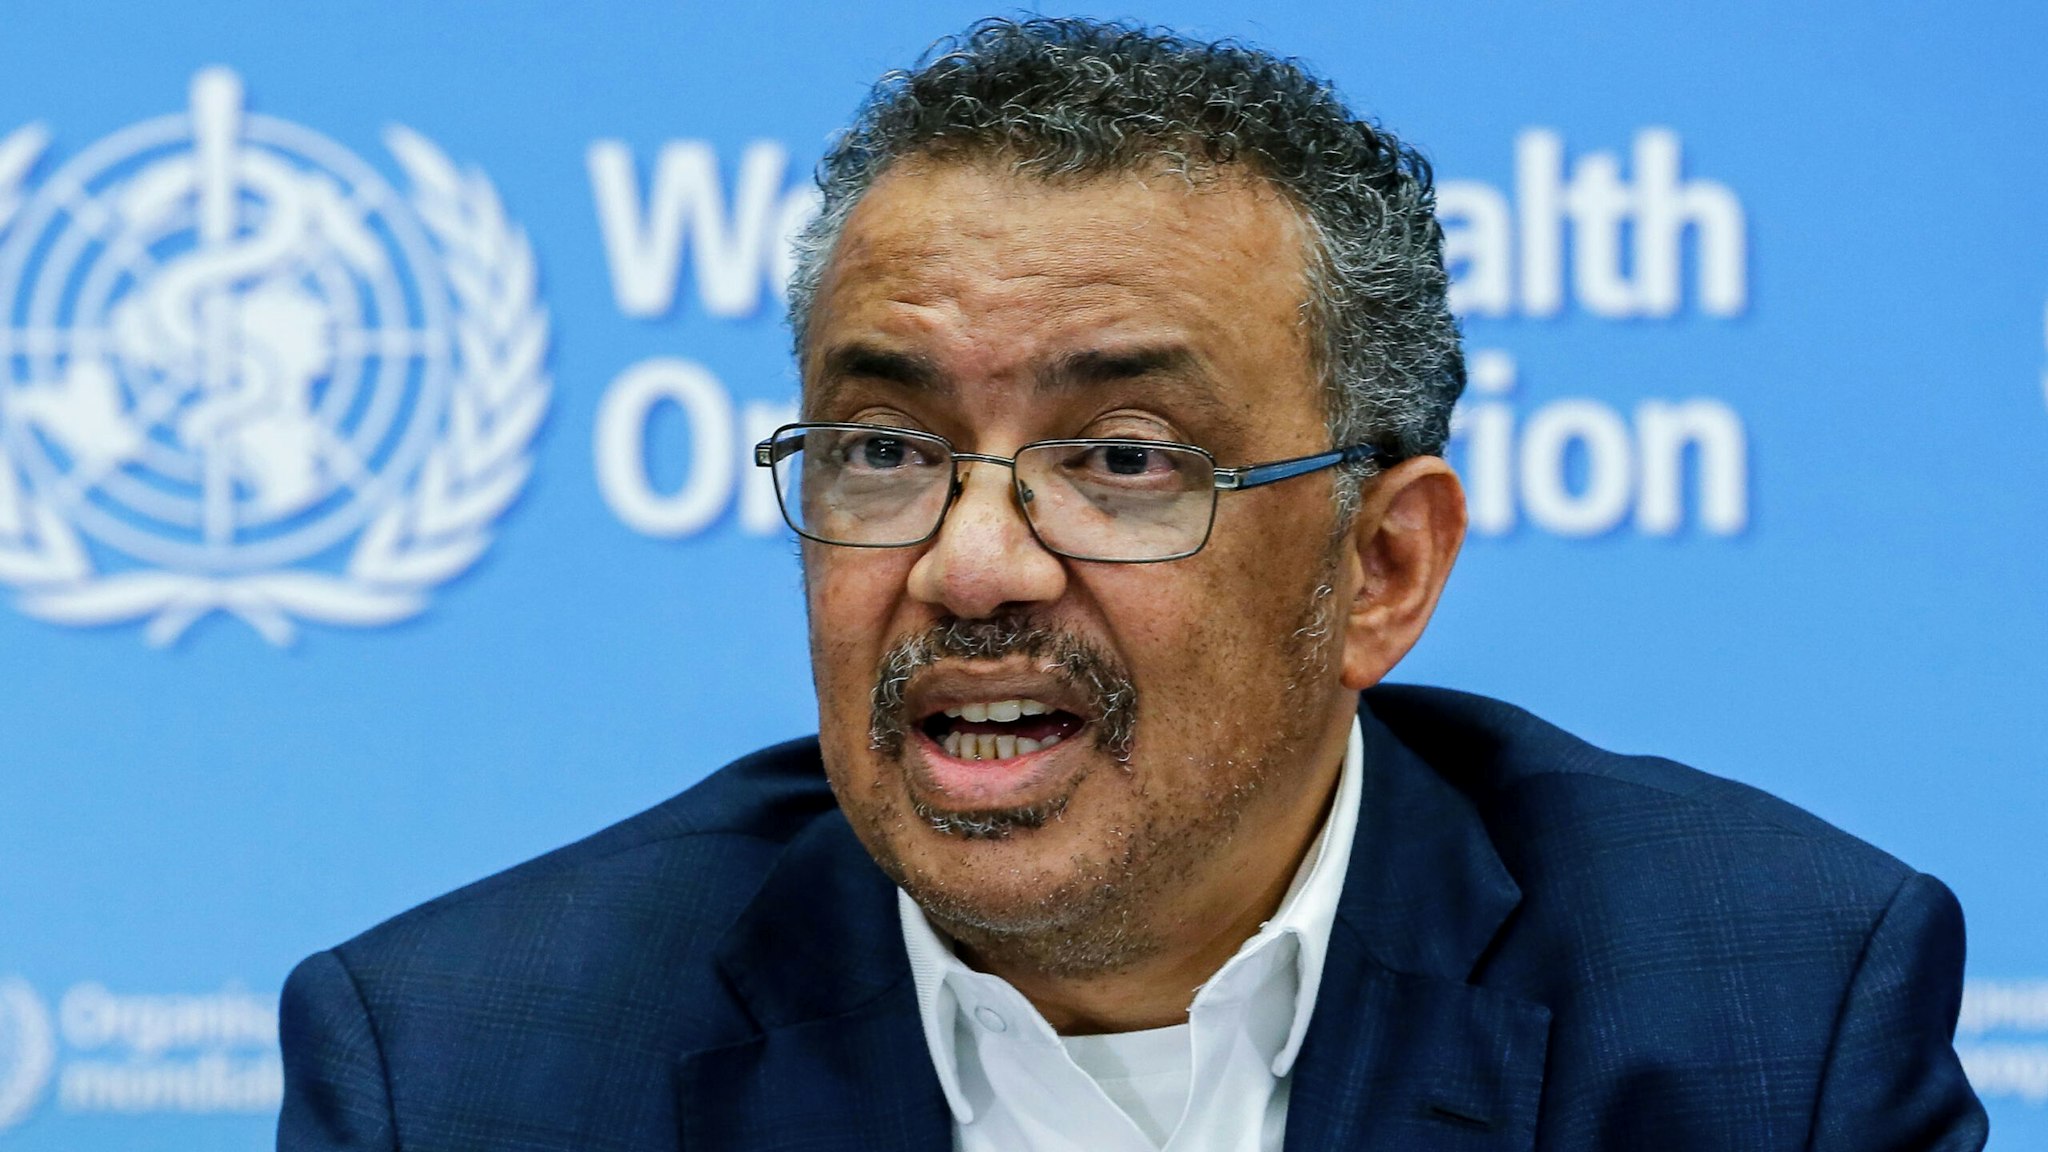 World Health Organization Director-General Tedros Adhanom Ghebreyesus speaks during a press conference following an emergency talks over the new SARS-like virus spreading in China and other nations in Geneva on January 22, 2020. - The coronavirus has sparked alarm because of its similarity to the outbreak of SARS (Severe Acute Respiratory Syndrome) that killed nearly 650 people across mainland China and Hong Kong in 2002-03.